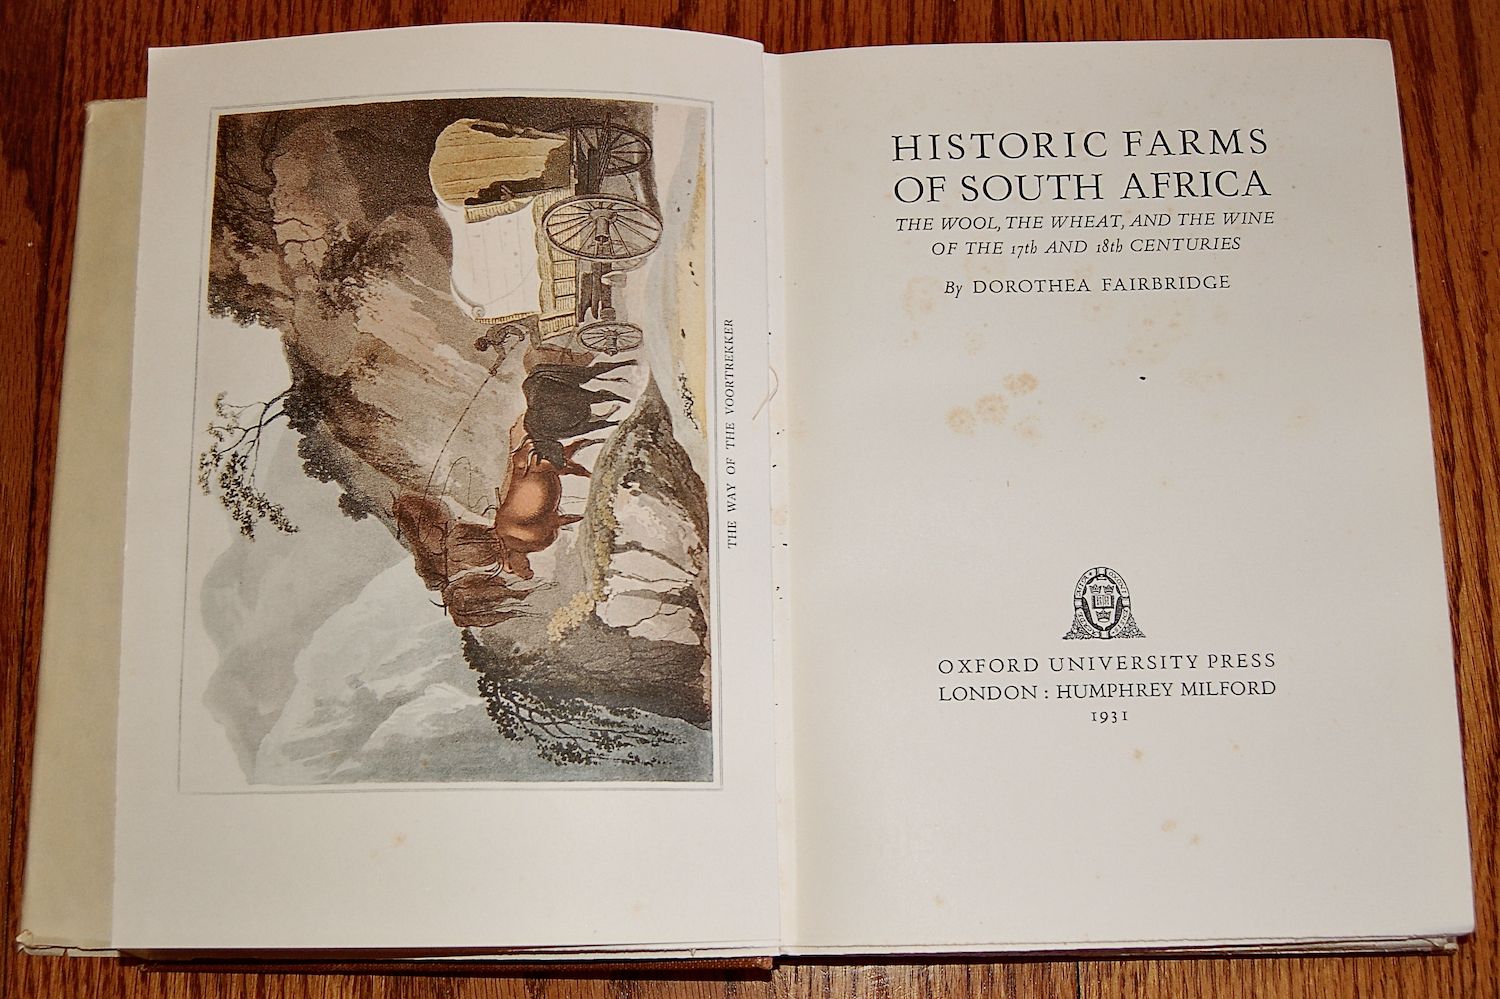 Historic Farms of South Africa. The Wool, the Wheat, and the Wine of the 17th and 18th Centuries.